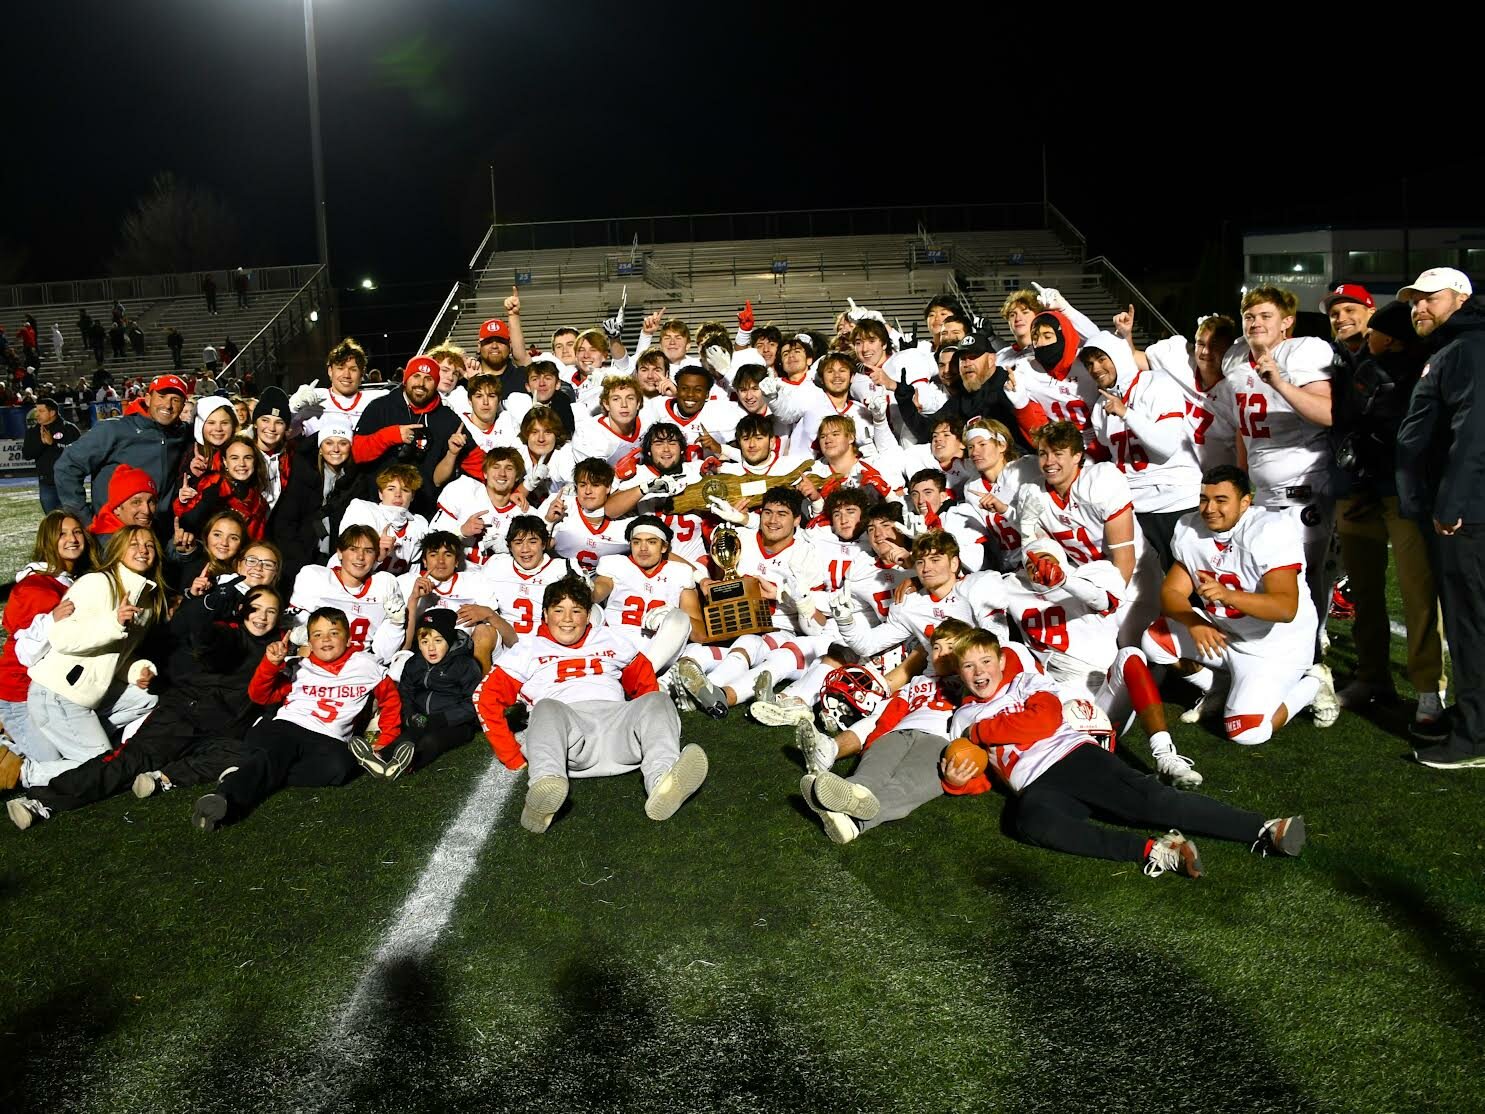 East Islip High School claimed its second-ever Long Island Football championship with a score of 19-14, Friday, November 24.